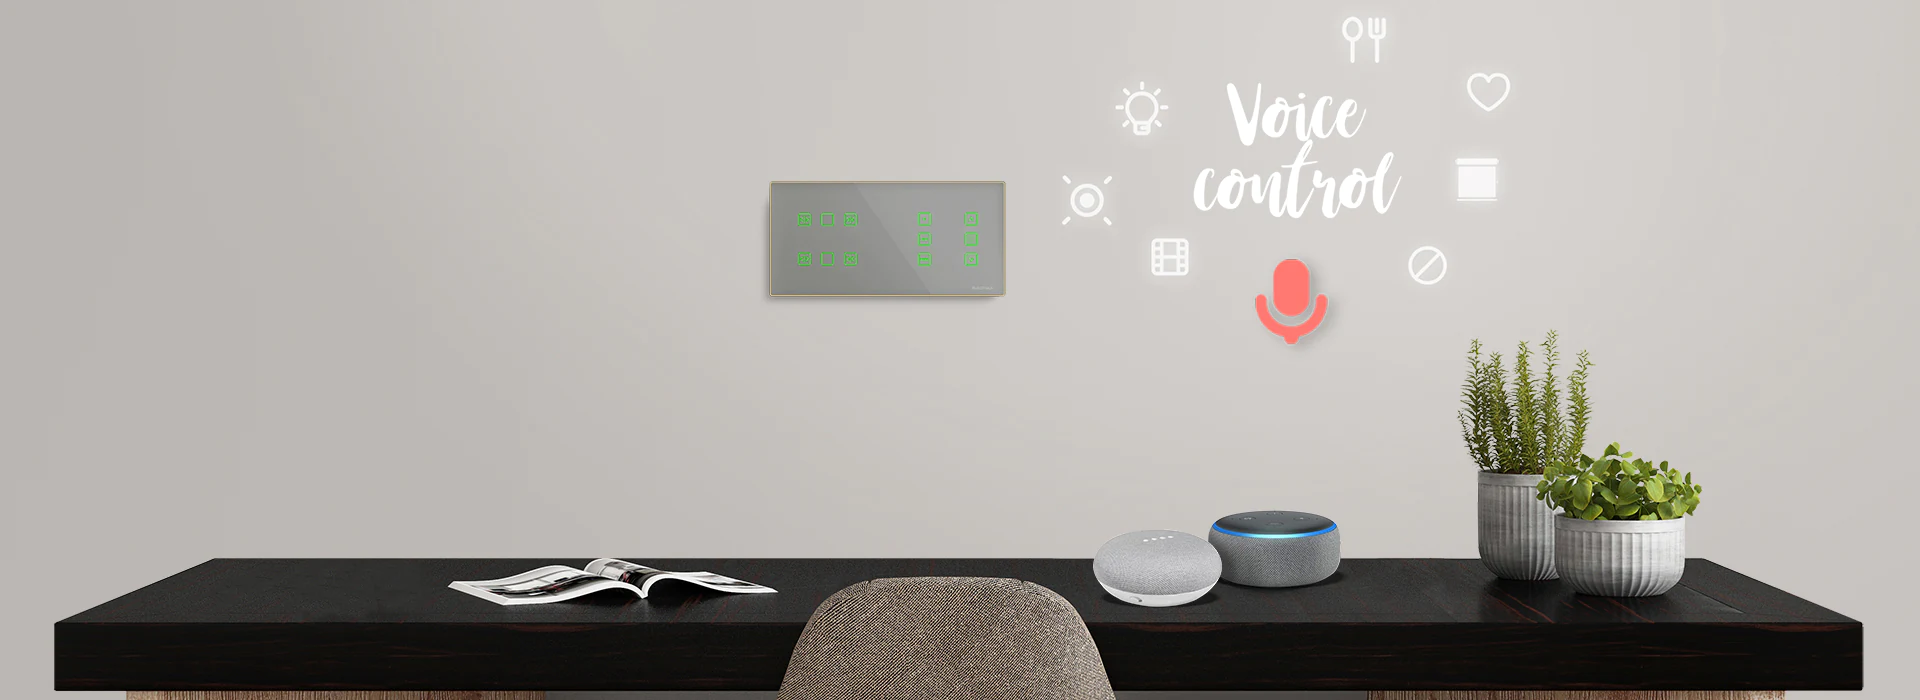 touch control switch with voice assistant